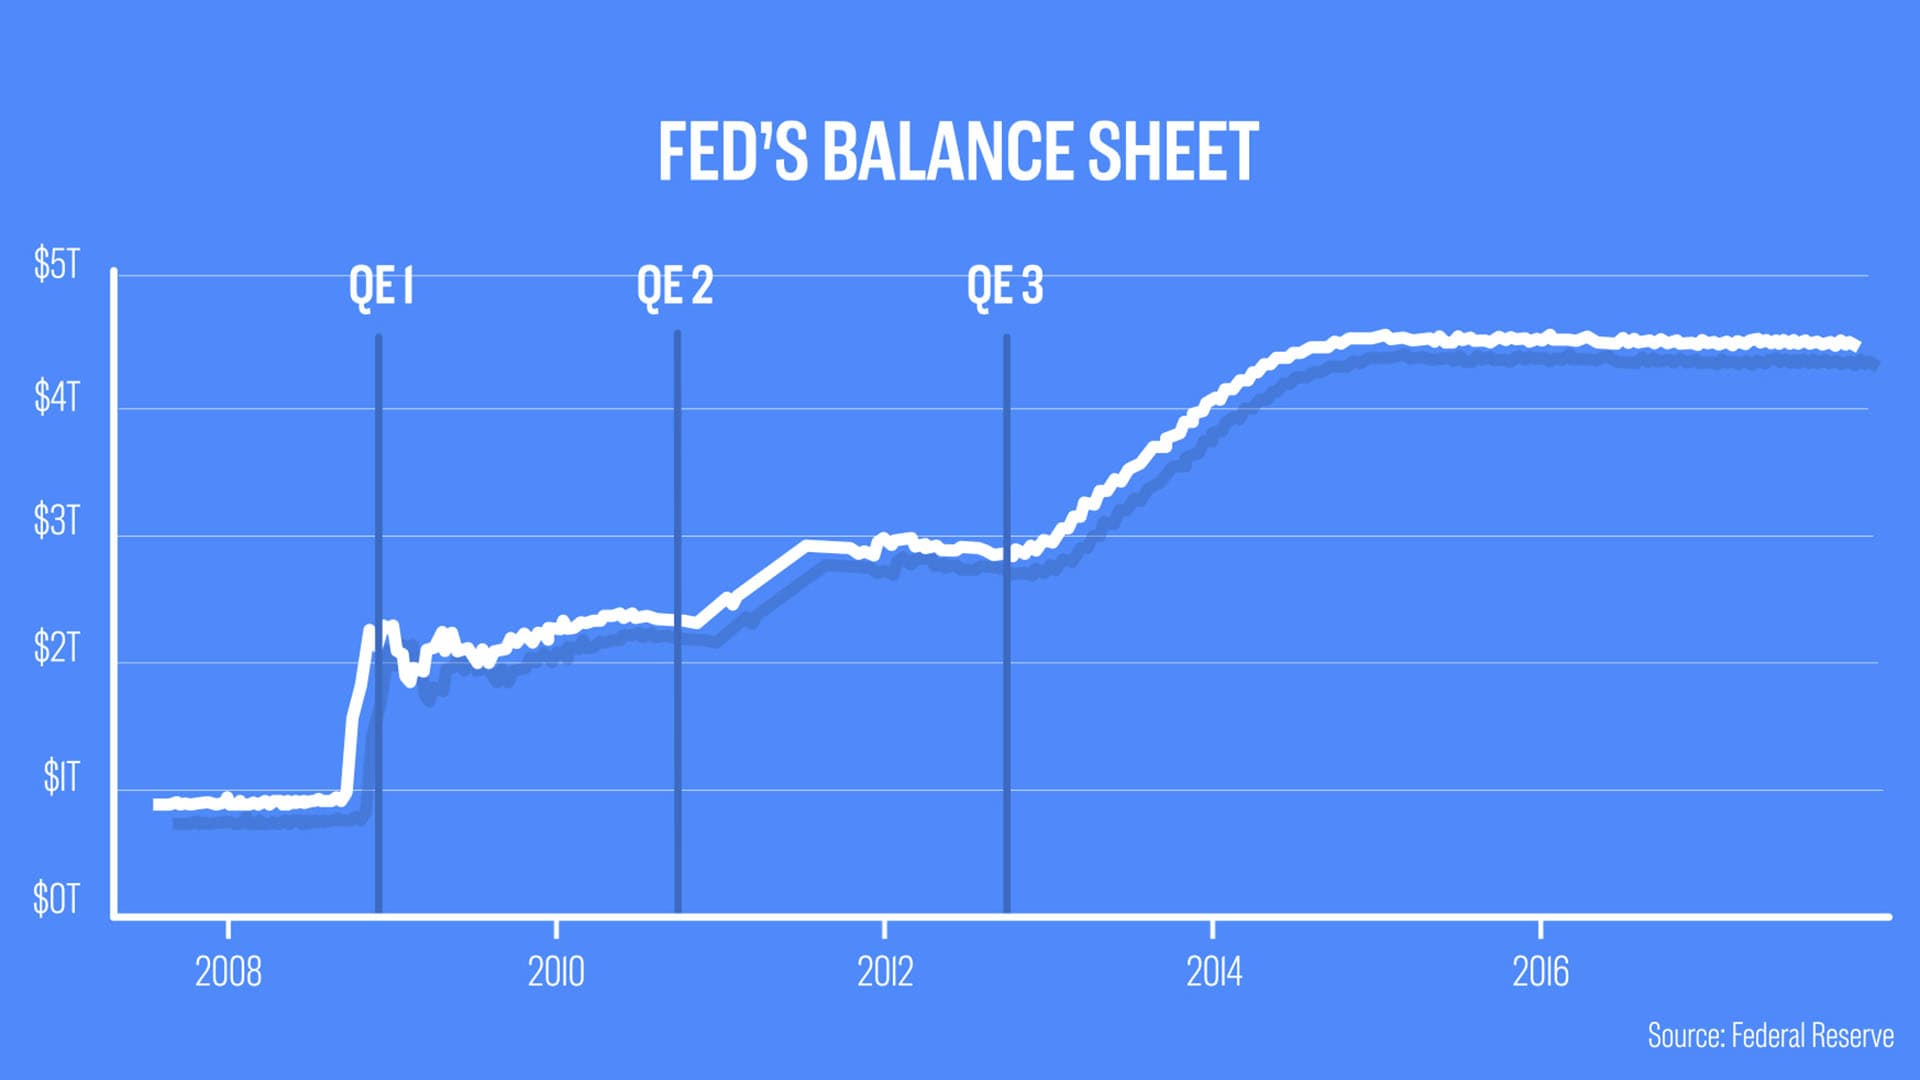 The Federal Reserve In Action Chart